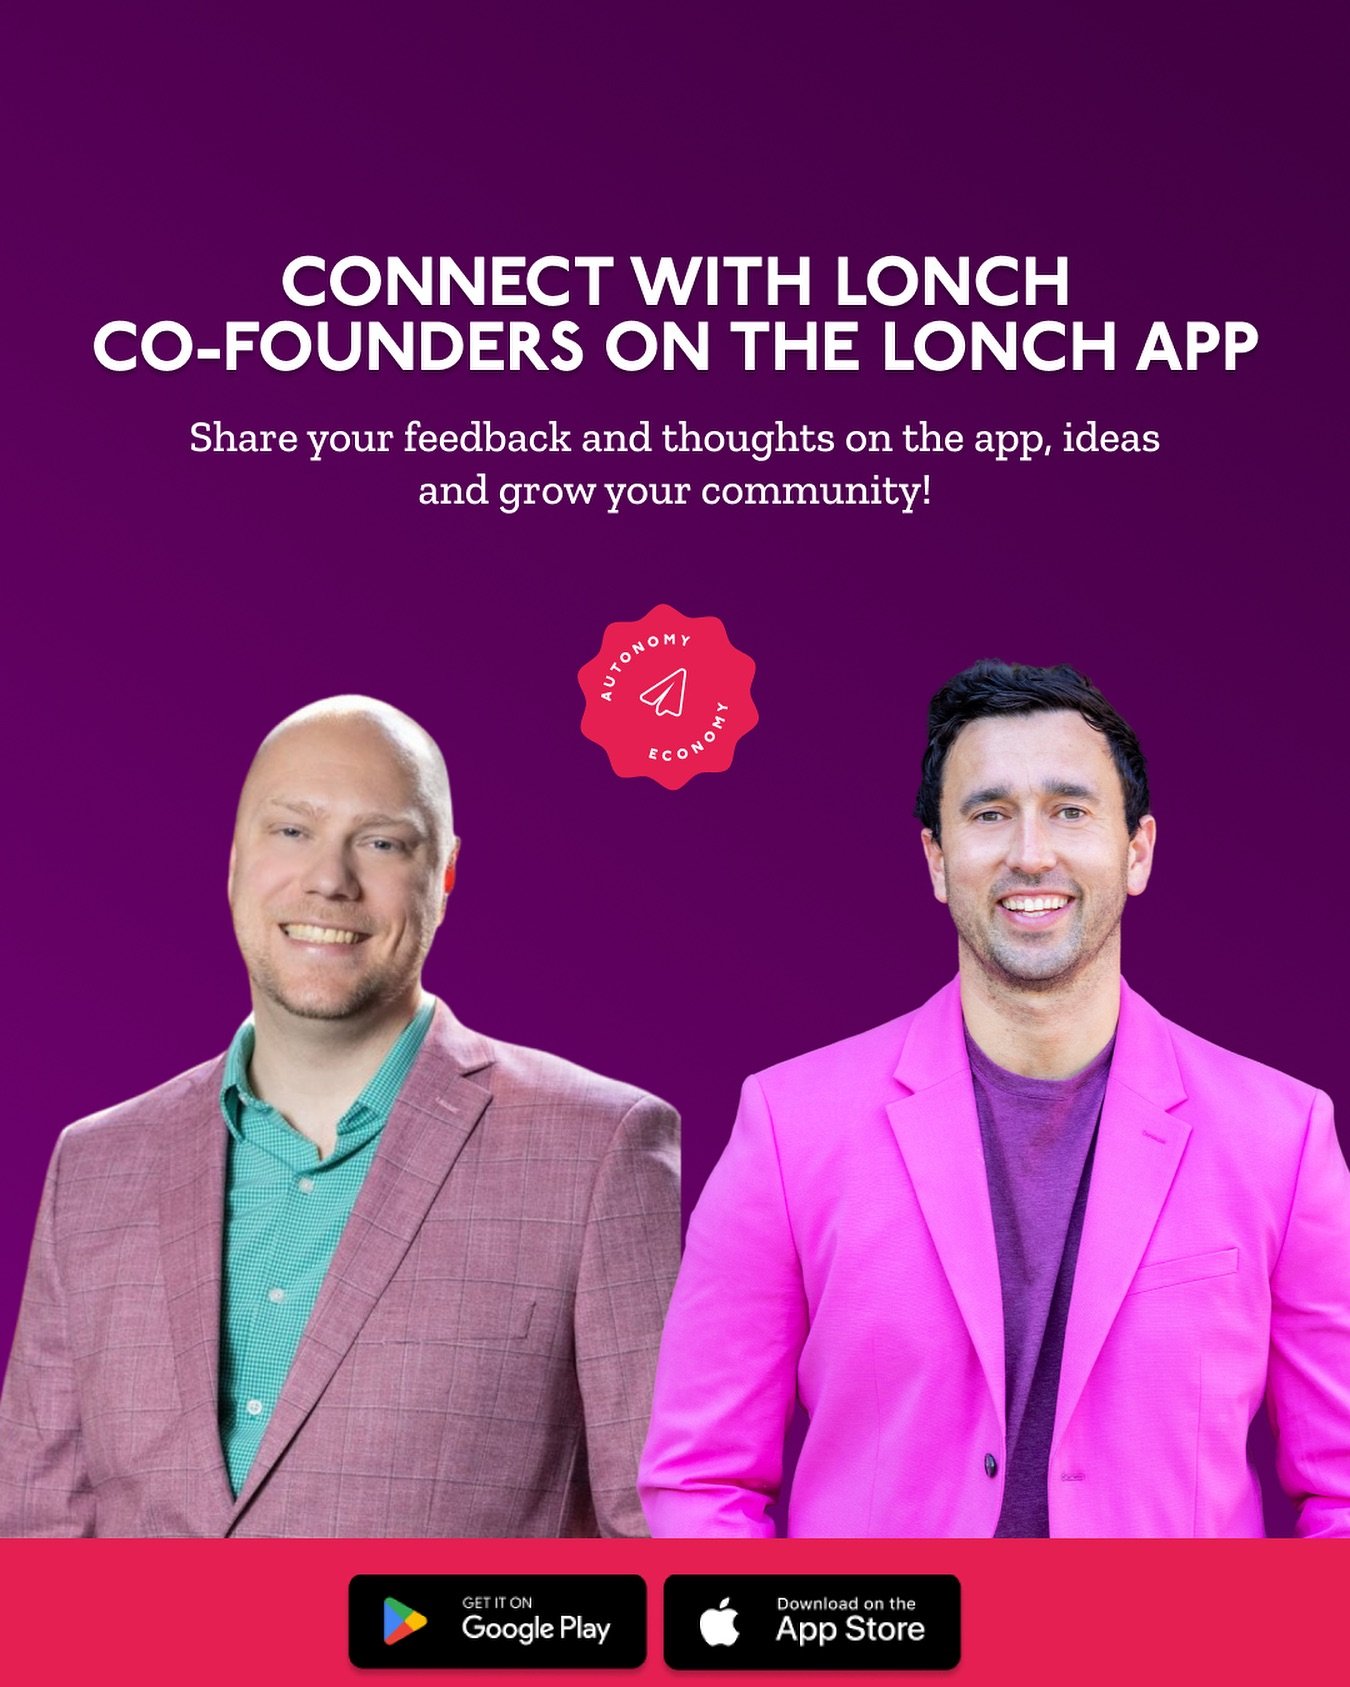 Connect with Lonch Co-founders Bobby Nims and Christopher Gulliver on the Lonch app. Our co-founders are excited to hear from the community so reach out to them for feedback, ideas or thoughts

#downloadnow 
#connect 
#lonchcommunity